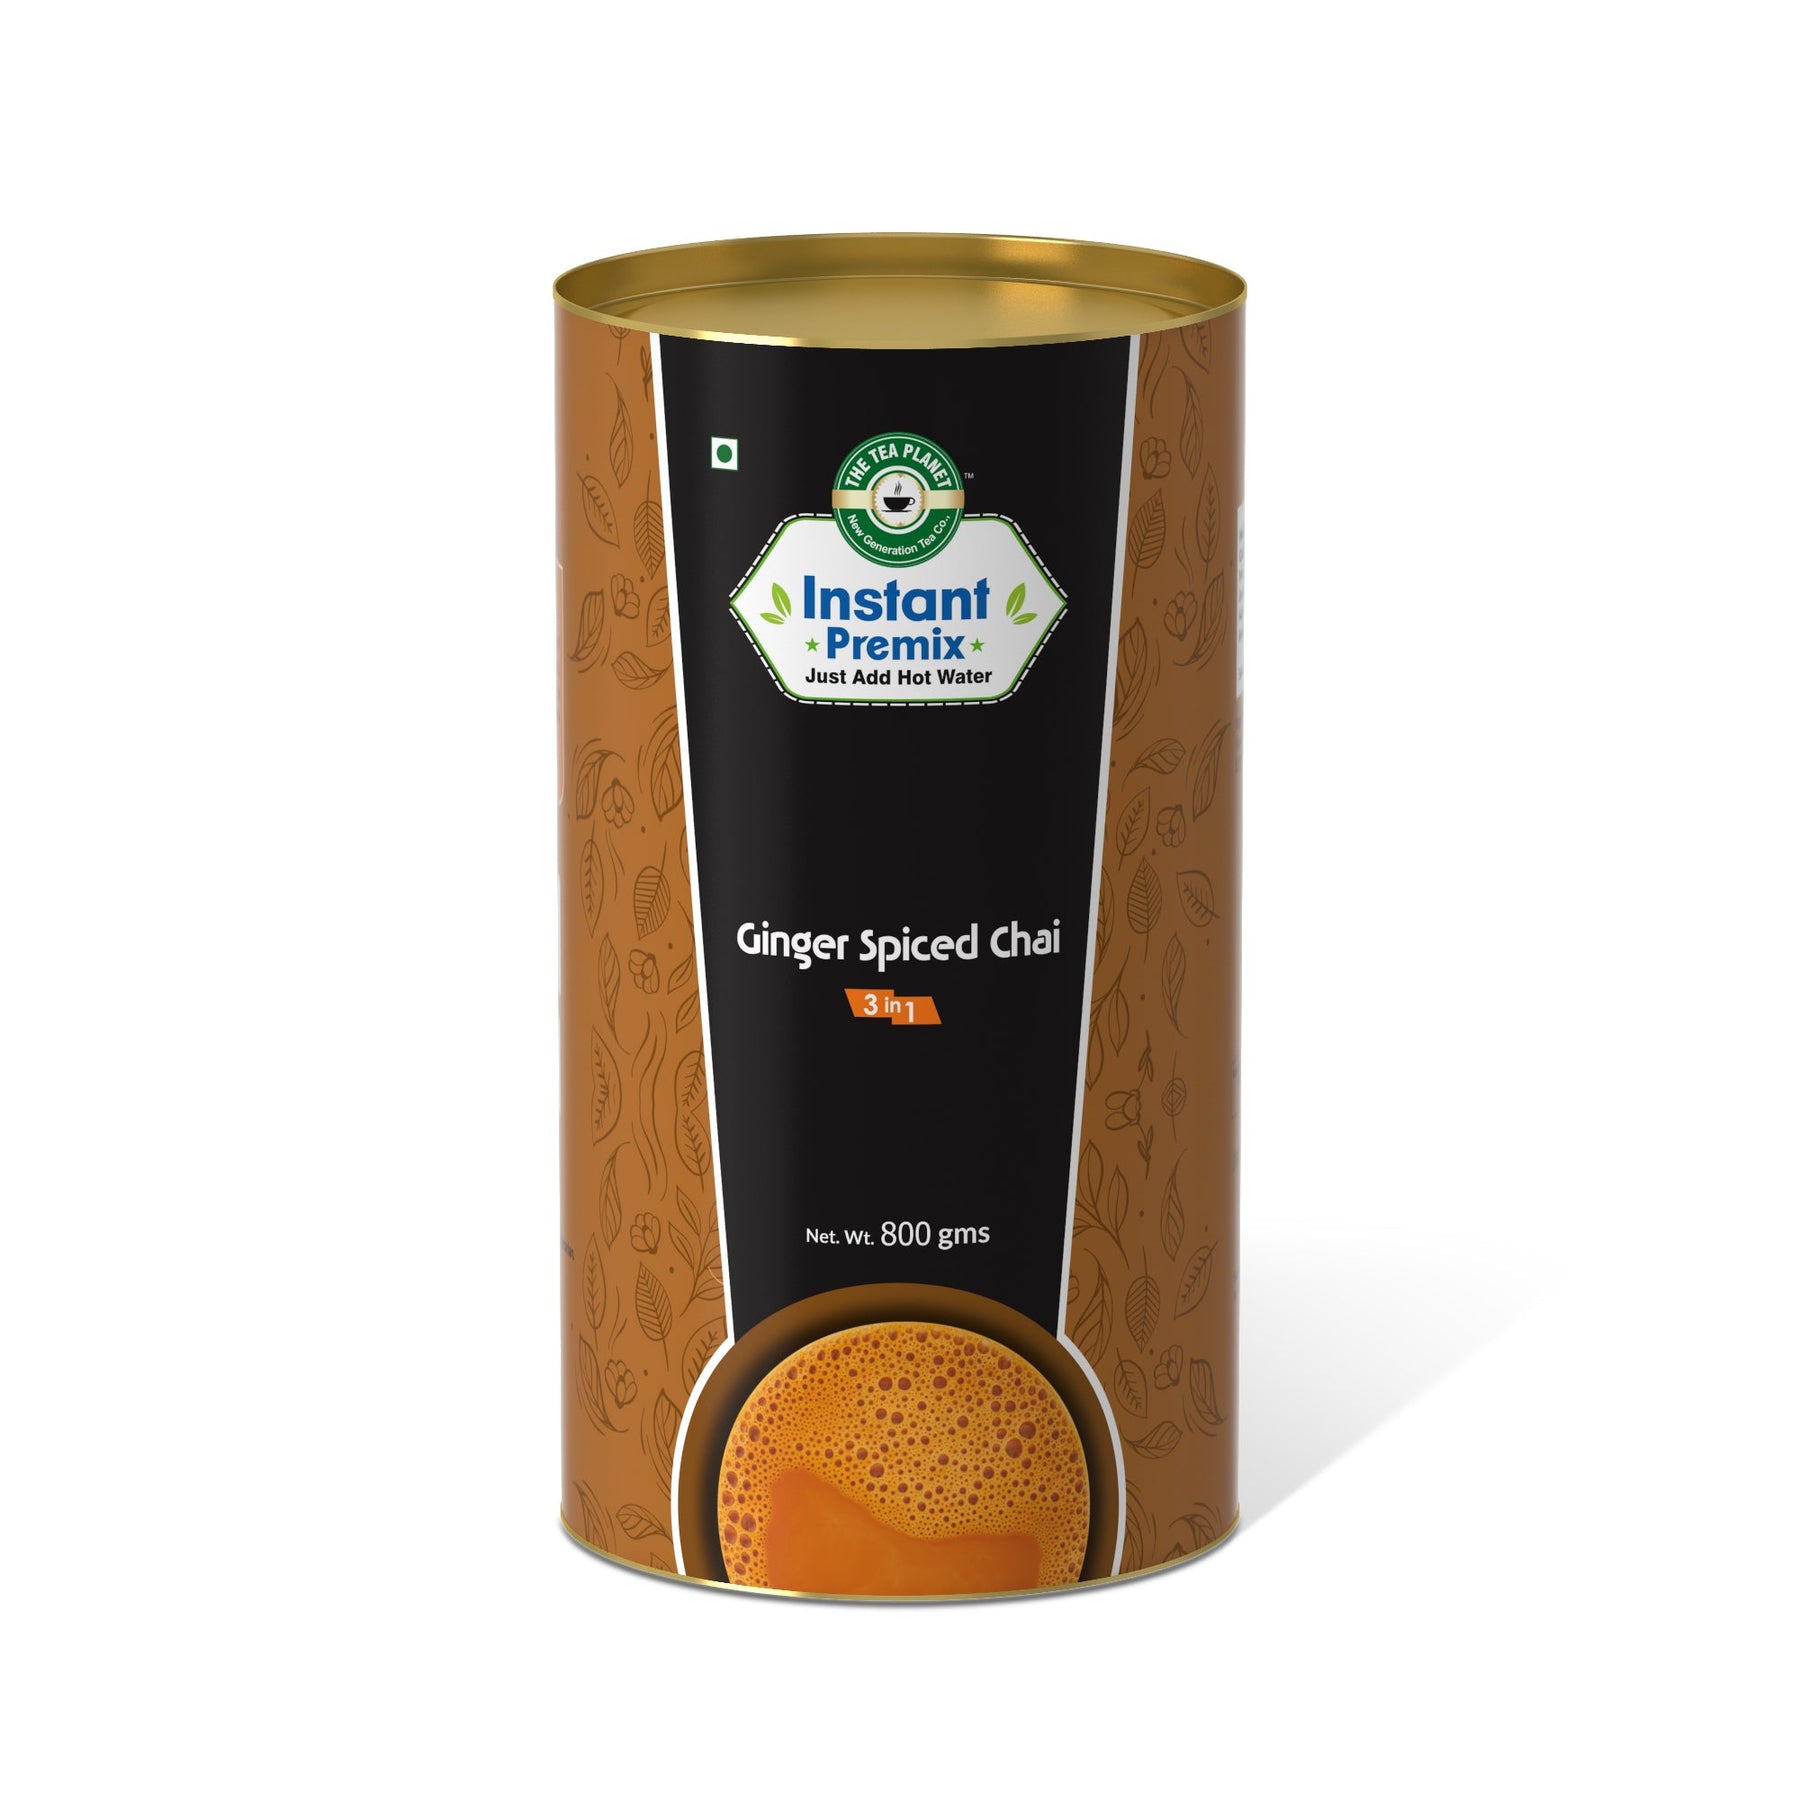 Ginger Spiced Chai Premix (3 in 1) - 250 gms